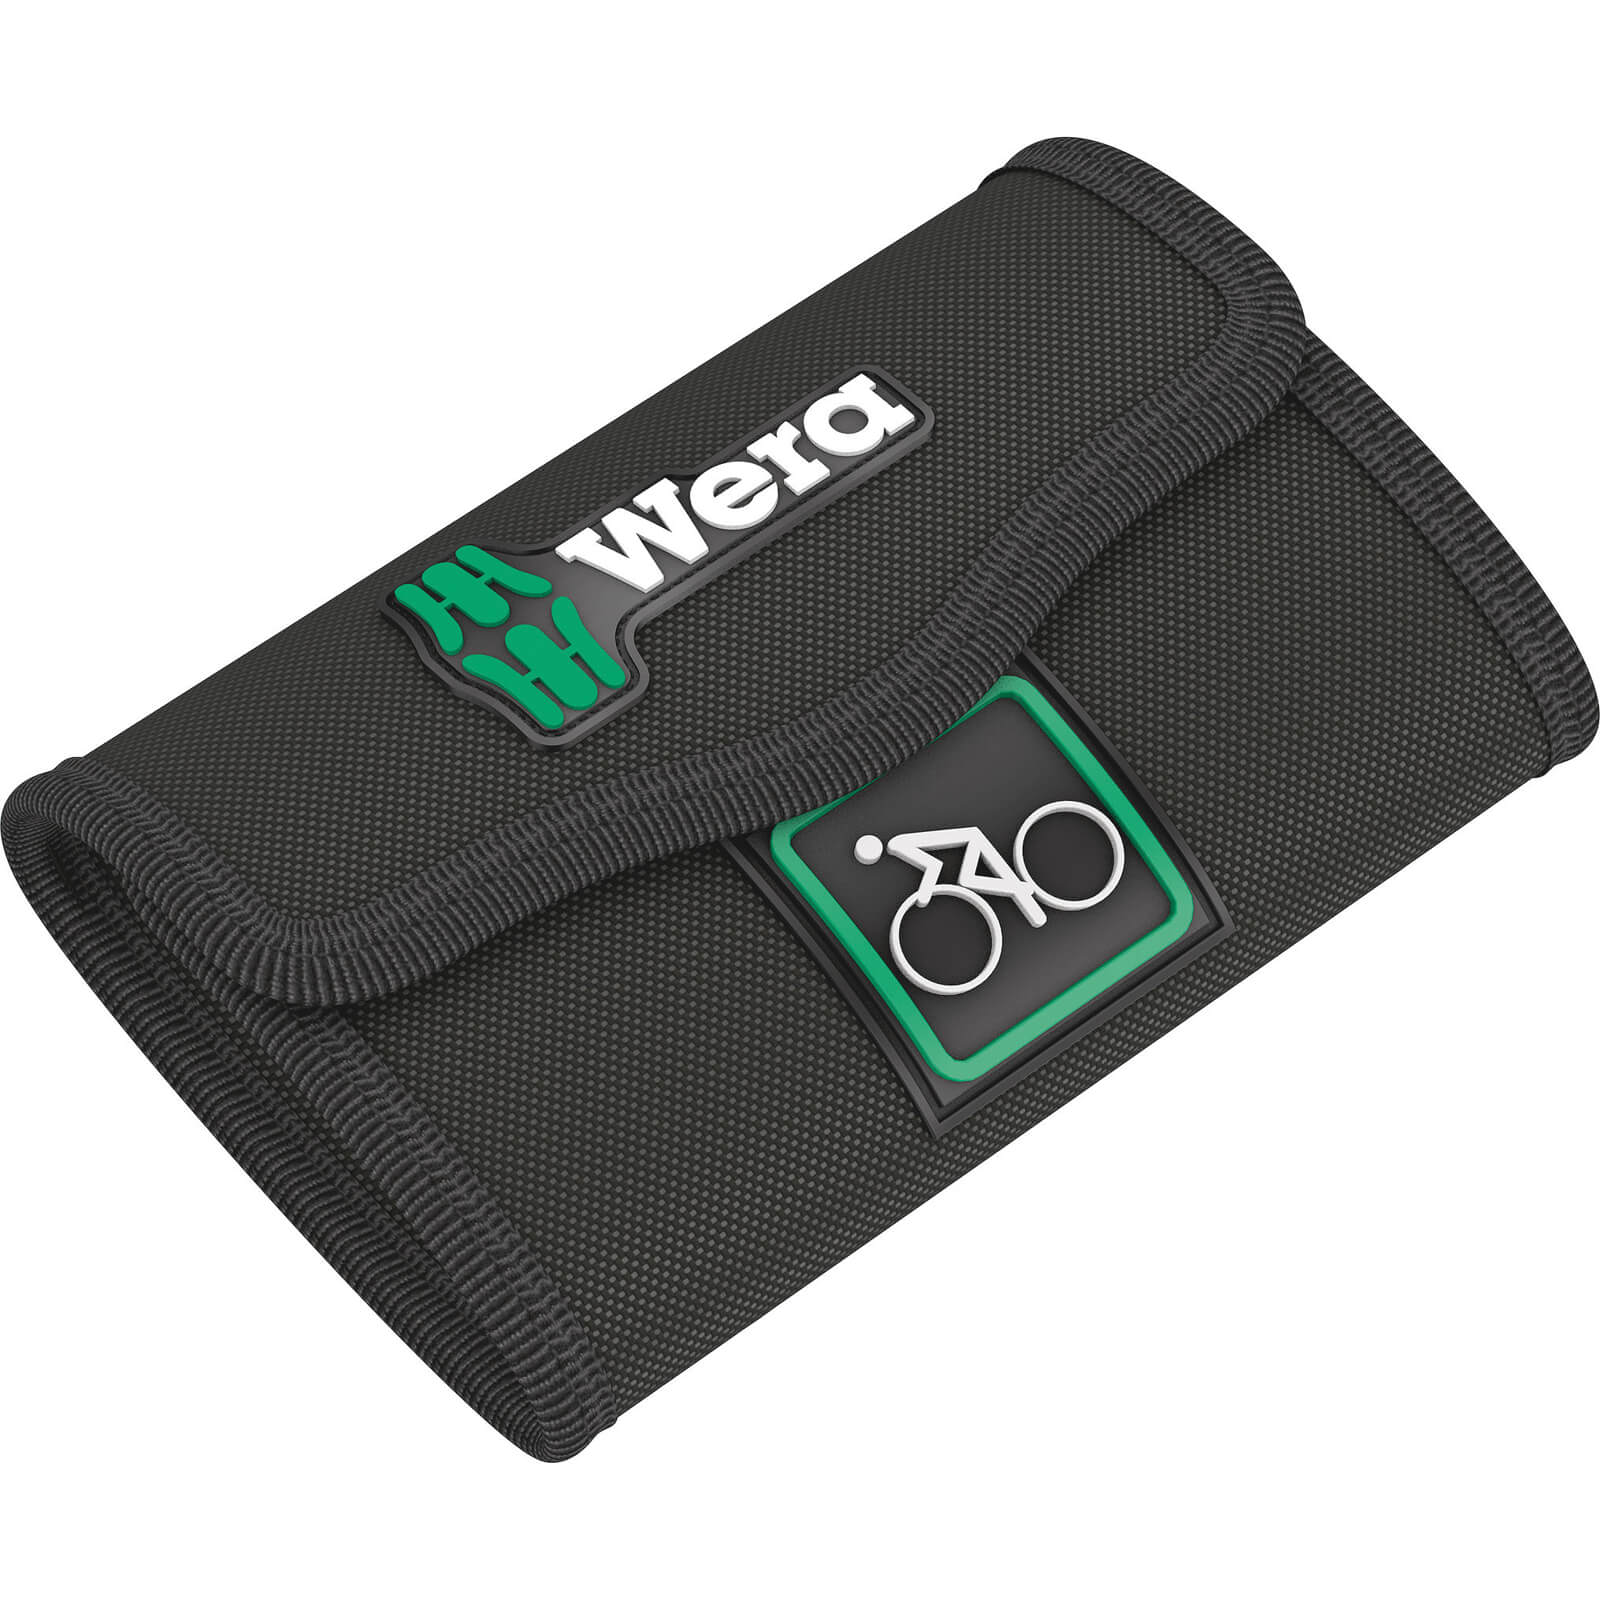 Image of Wera 9431 2Go Folding Bicycle Tool Kit Pouch